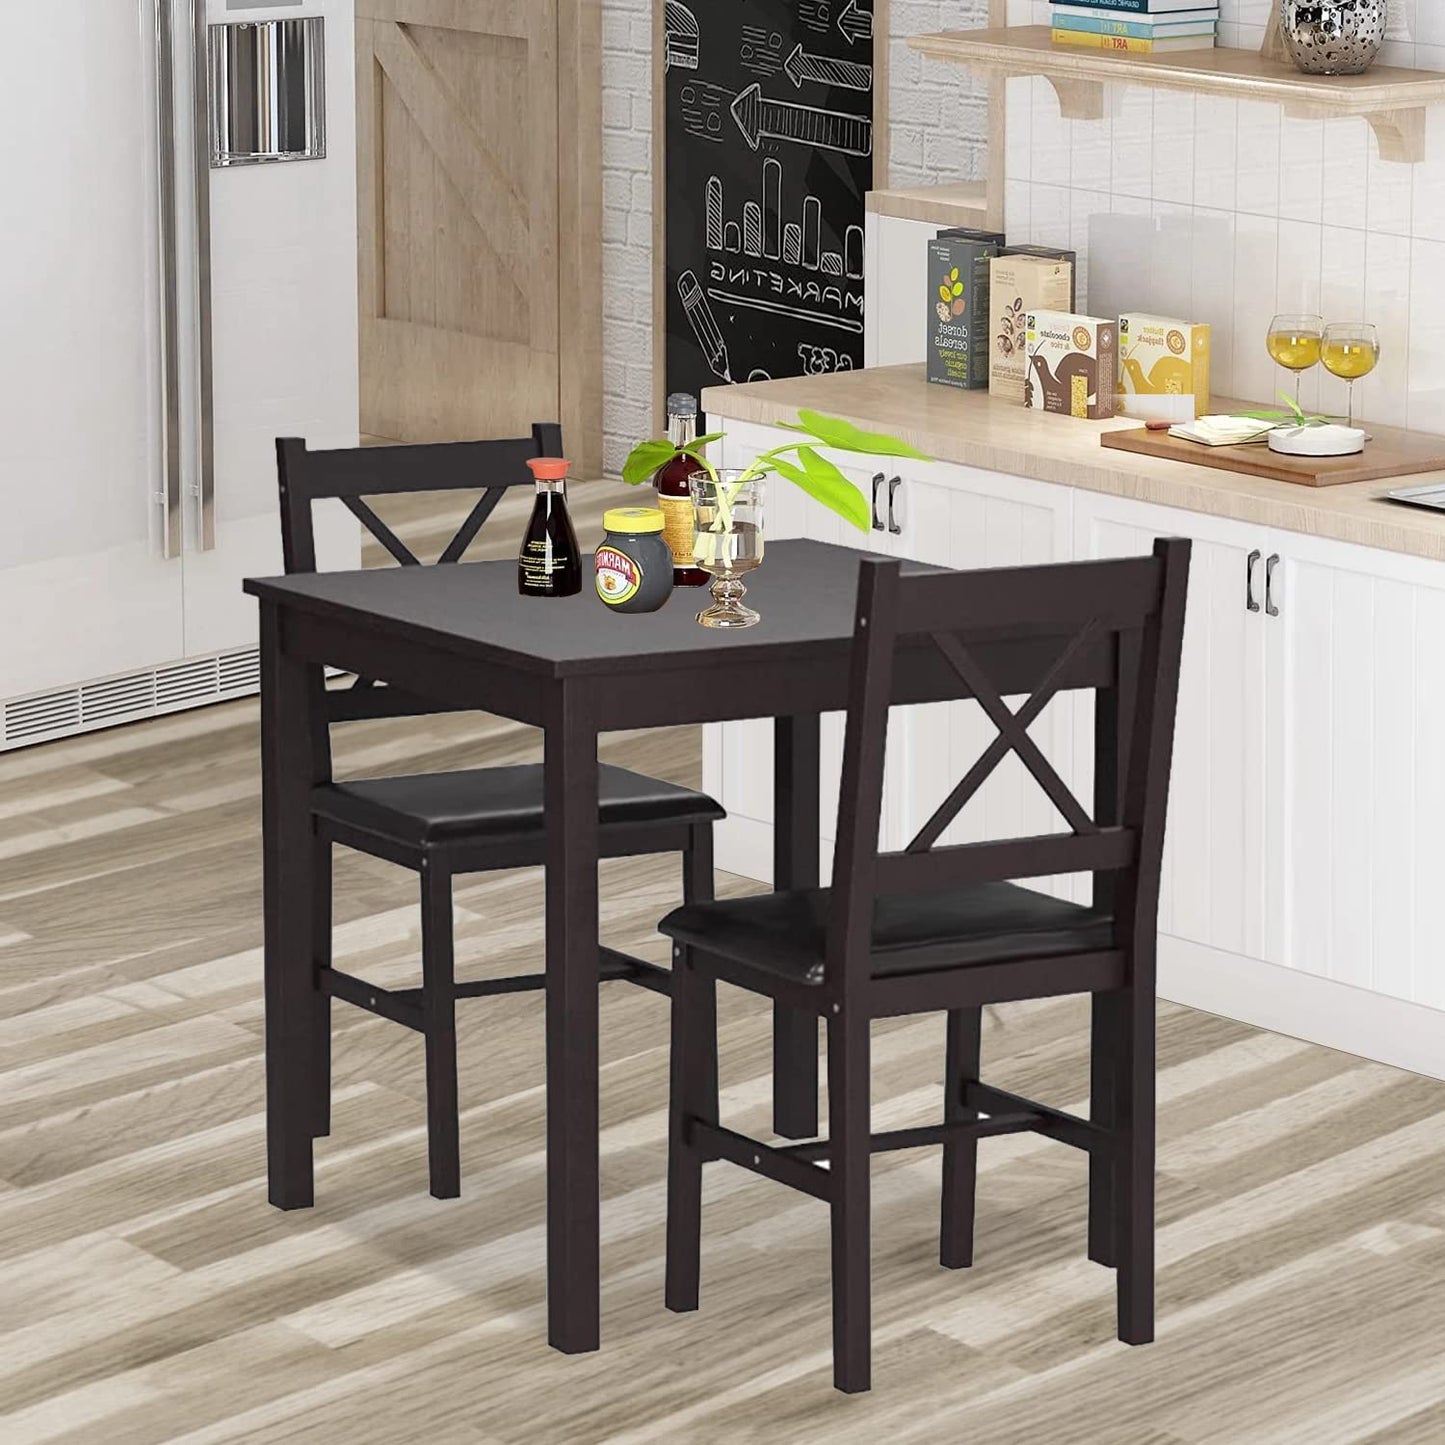 Hudada Kitchen Table Set 3 Piece Dining Table Set Sturdy Wooden Square Table and Chair Breakfast Table Set for 2 Person, Small Dining Room Table Set